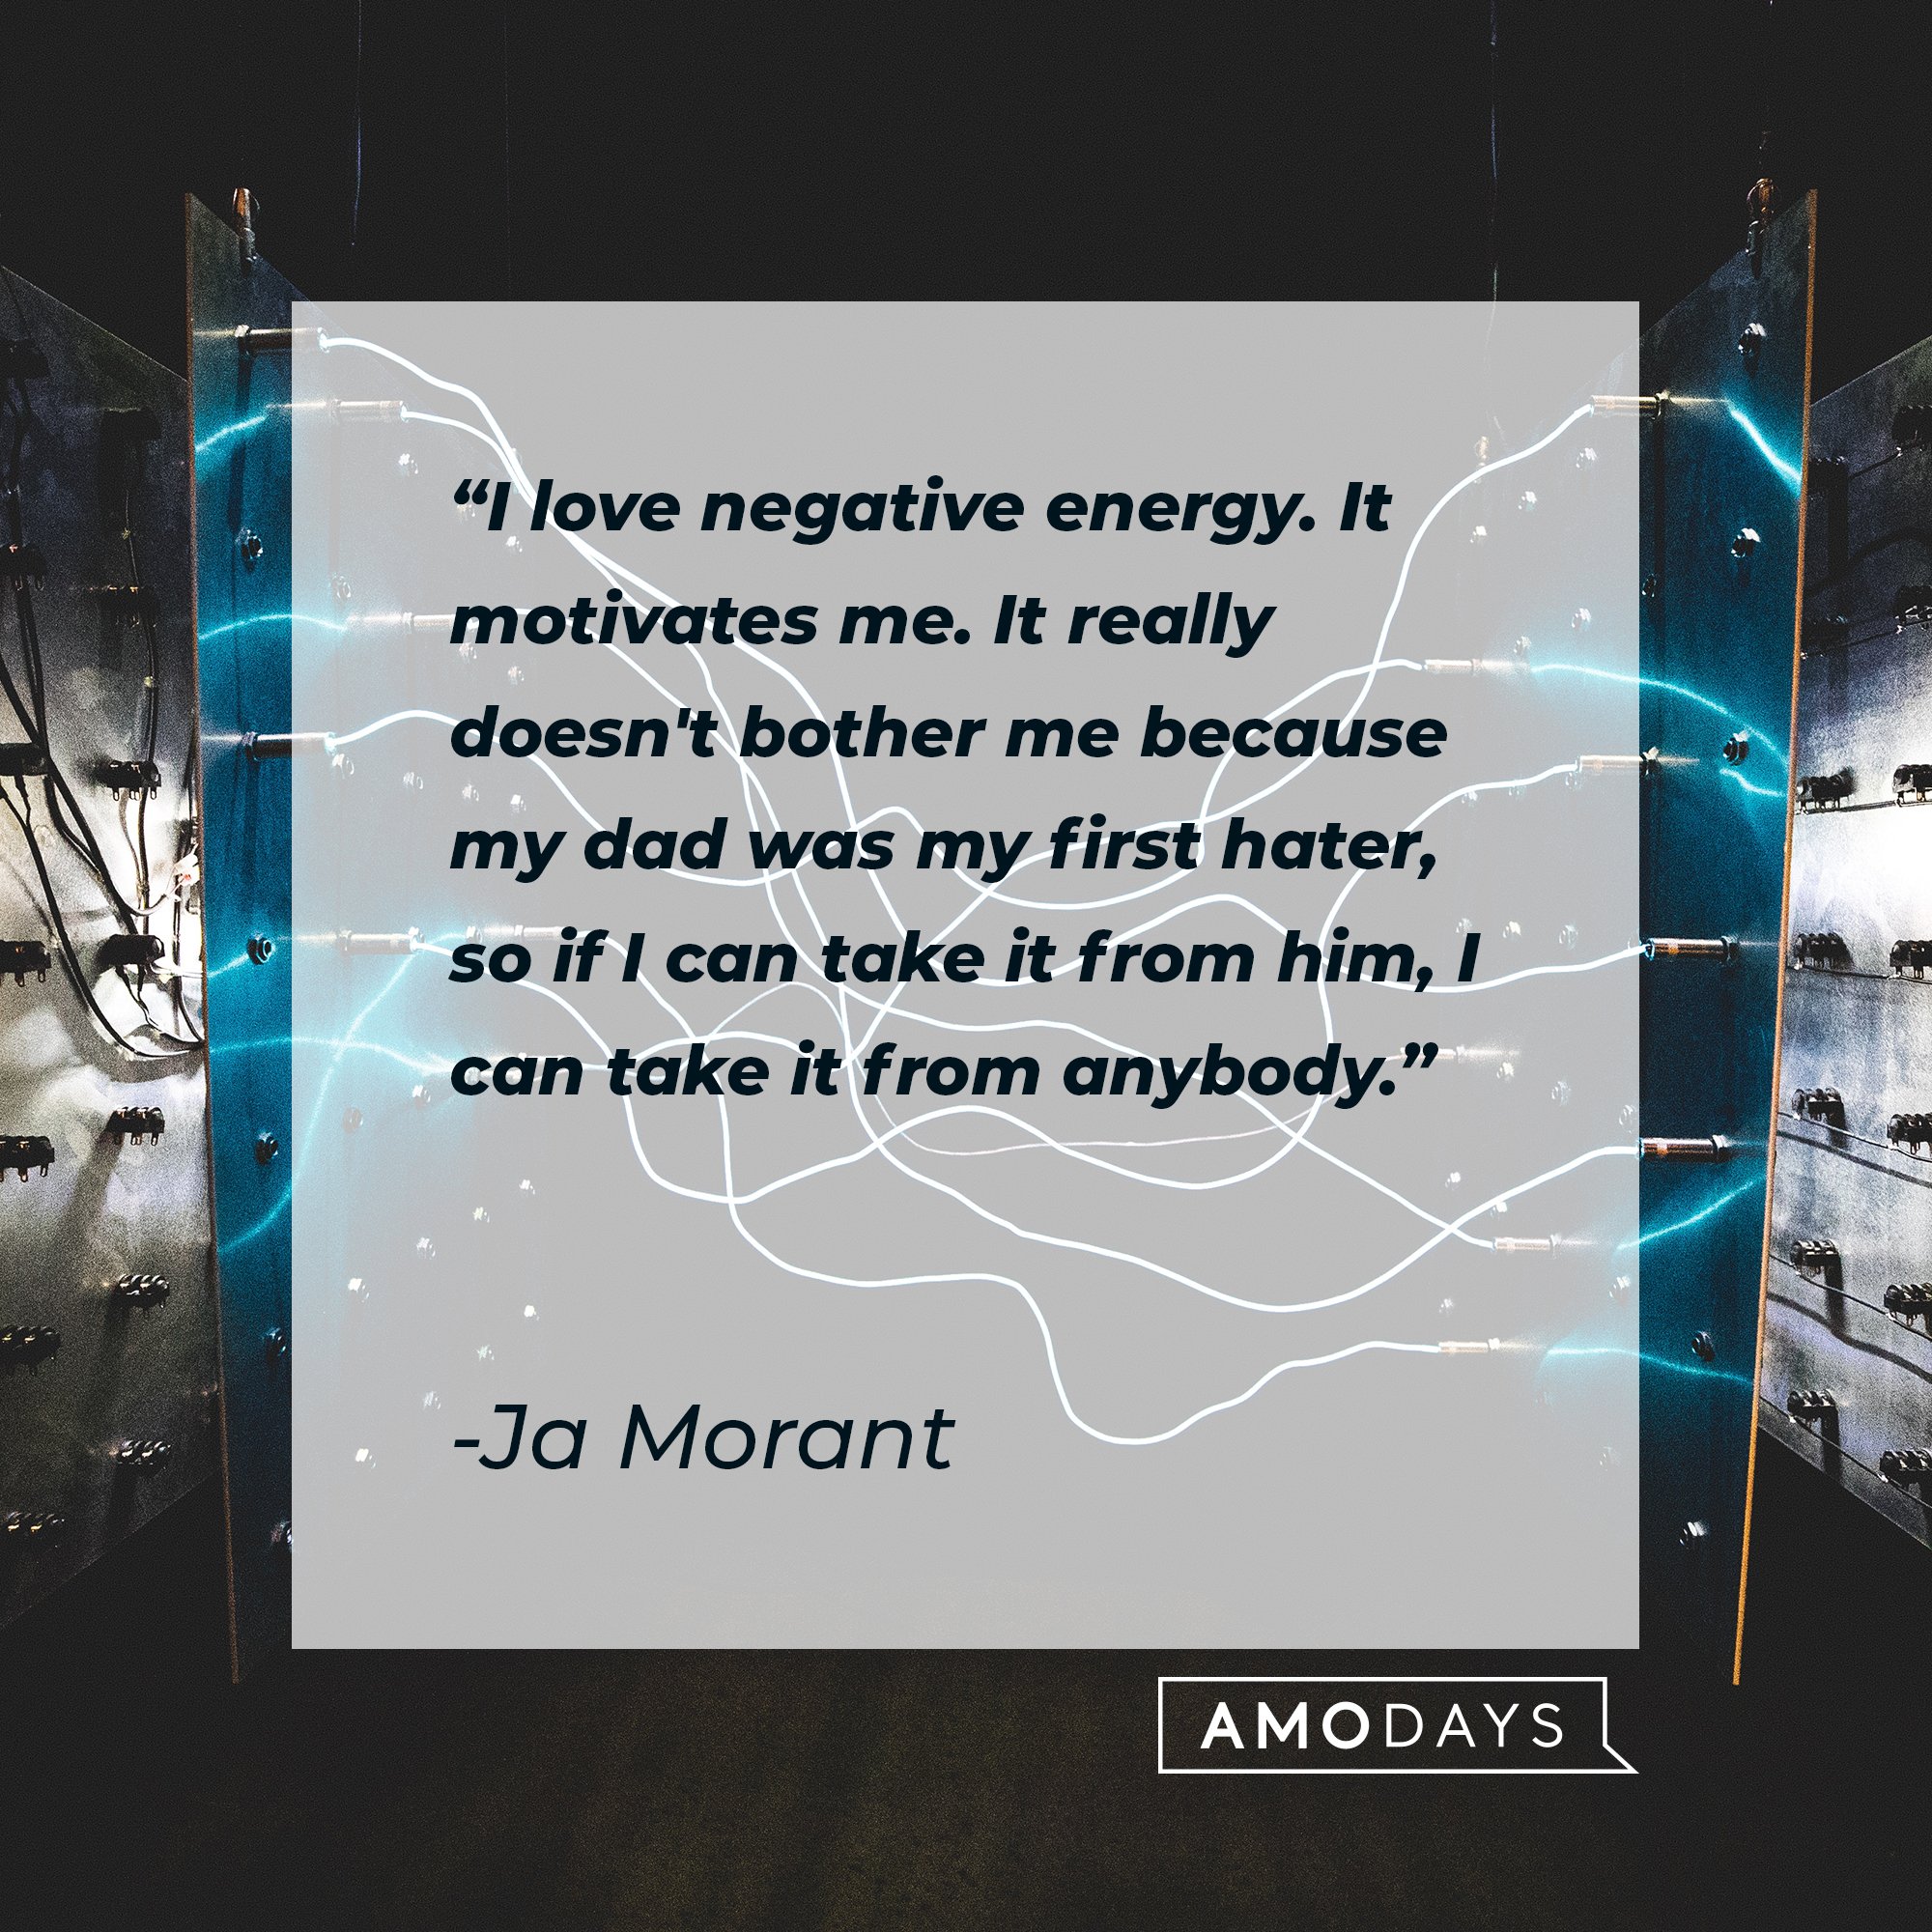 Ja Morant’s quote: "I love negative energy. It motivates me. It really doesn't bother me because my dad was my first hater, so if I can take it from him, I can take it from anybody." | Image: AmoDays 